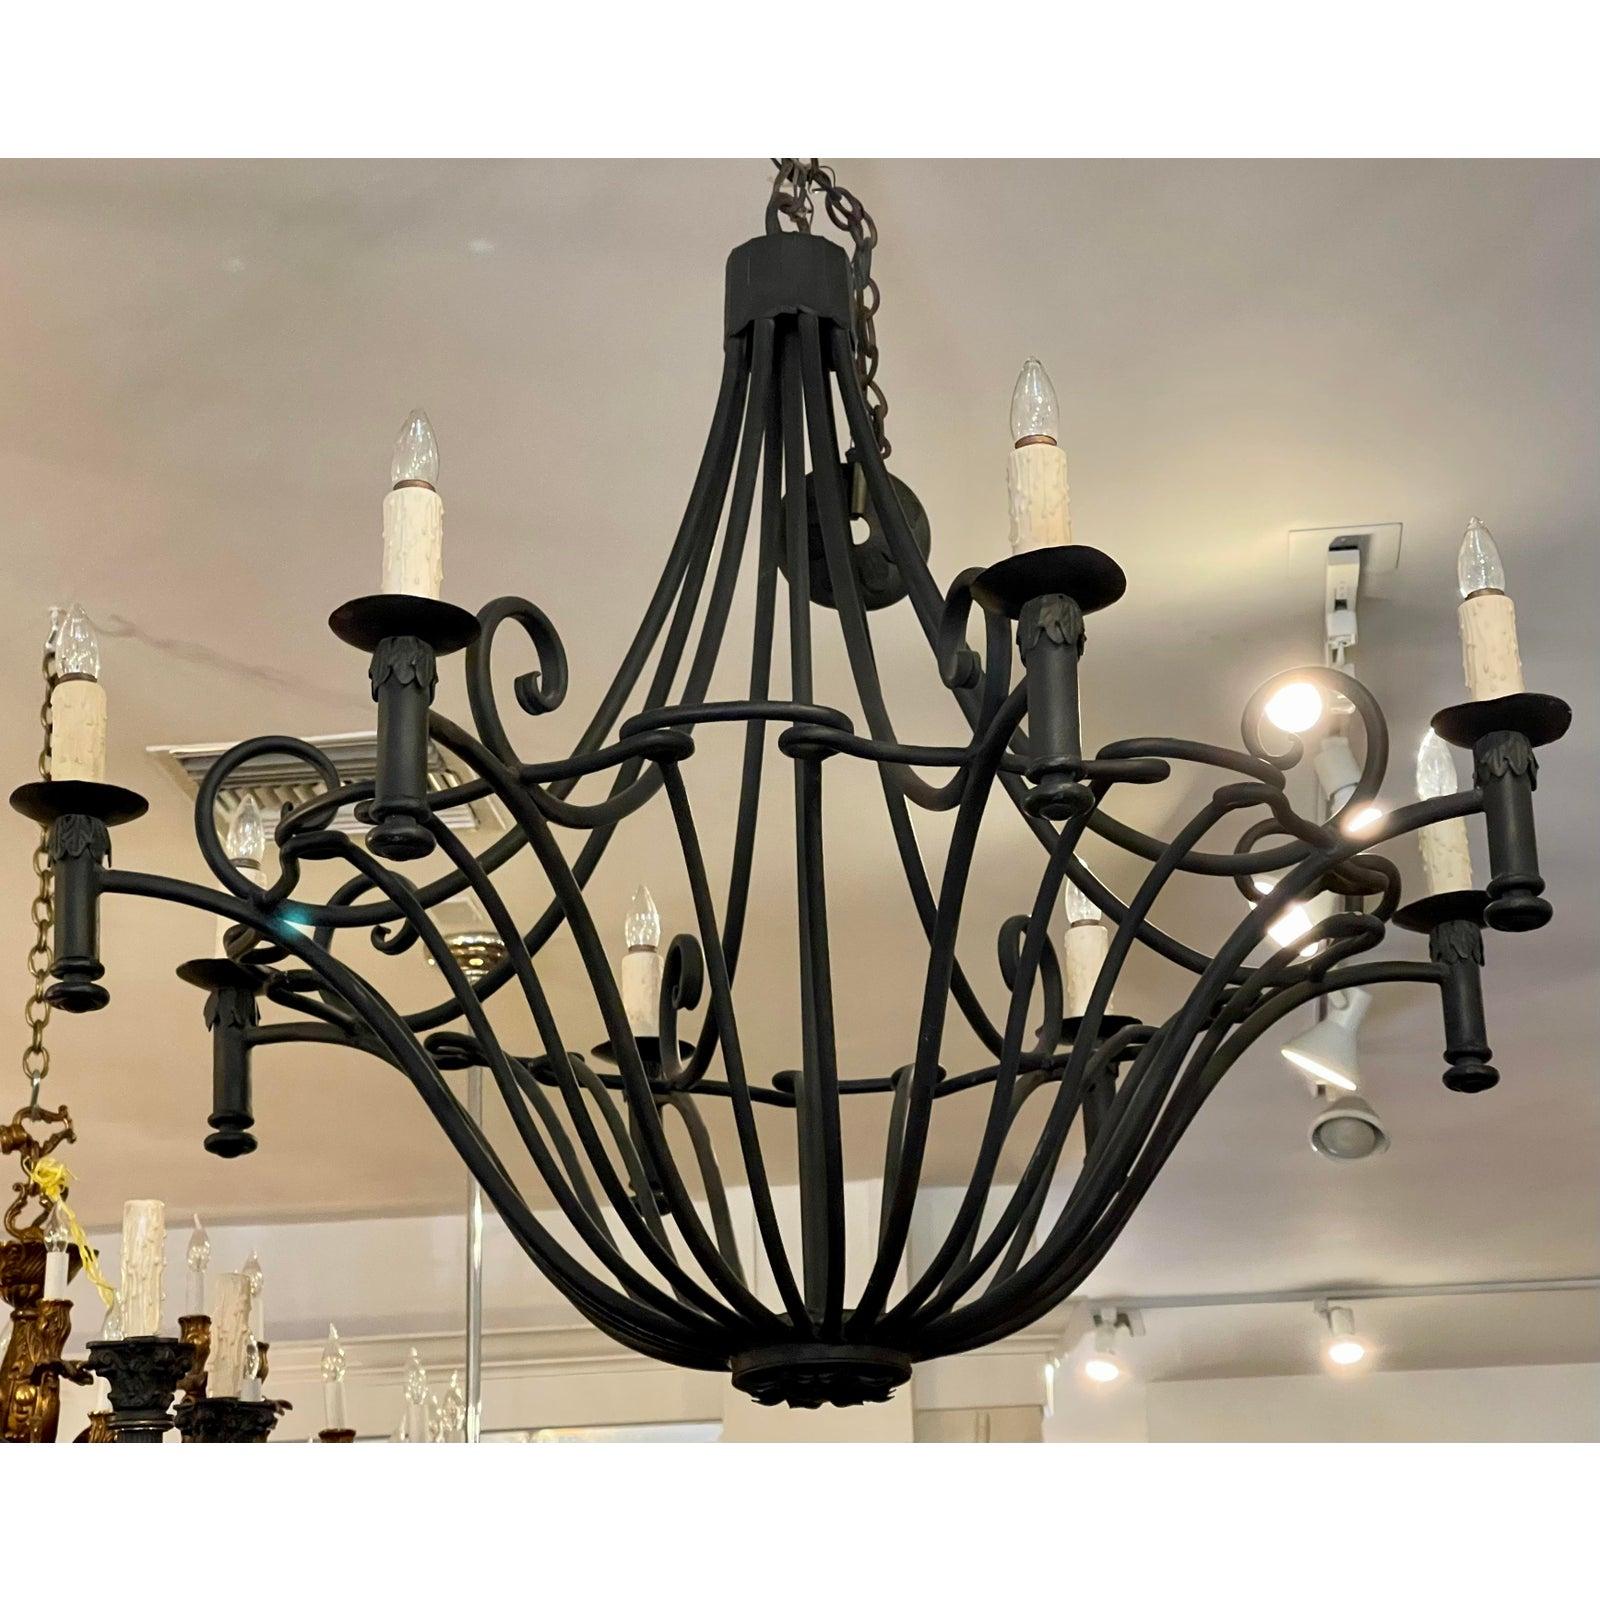 Contemporary Ebanista Spanish Colonial Wrought Iron Chandelier Famous Estate For Sale